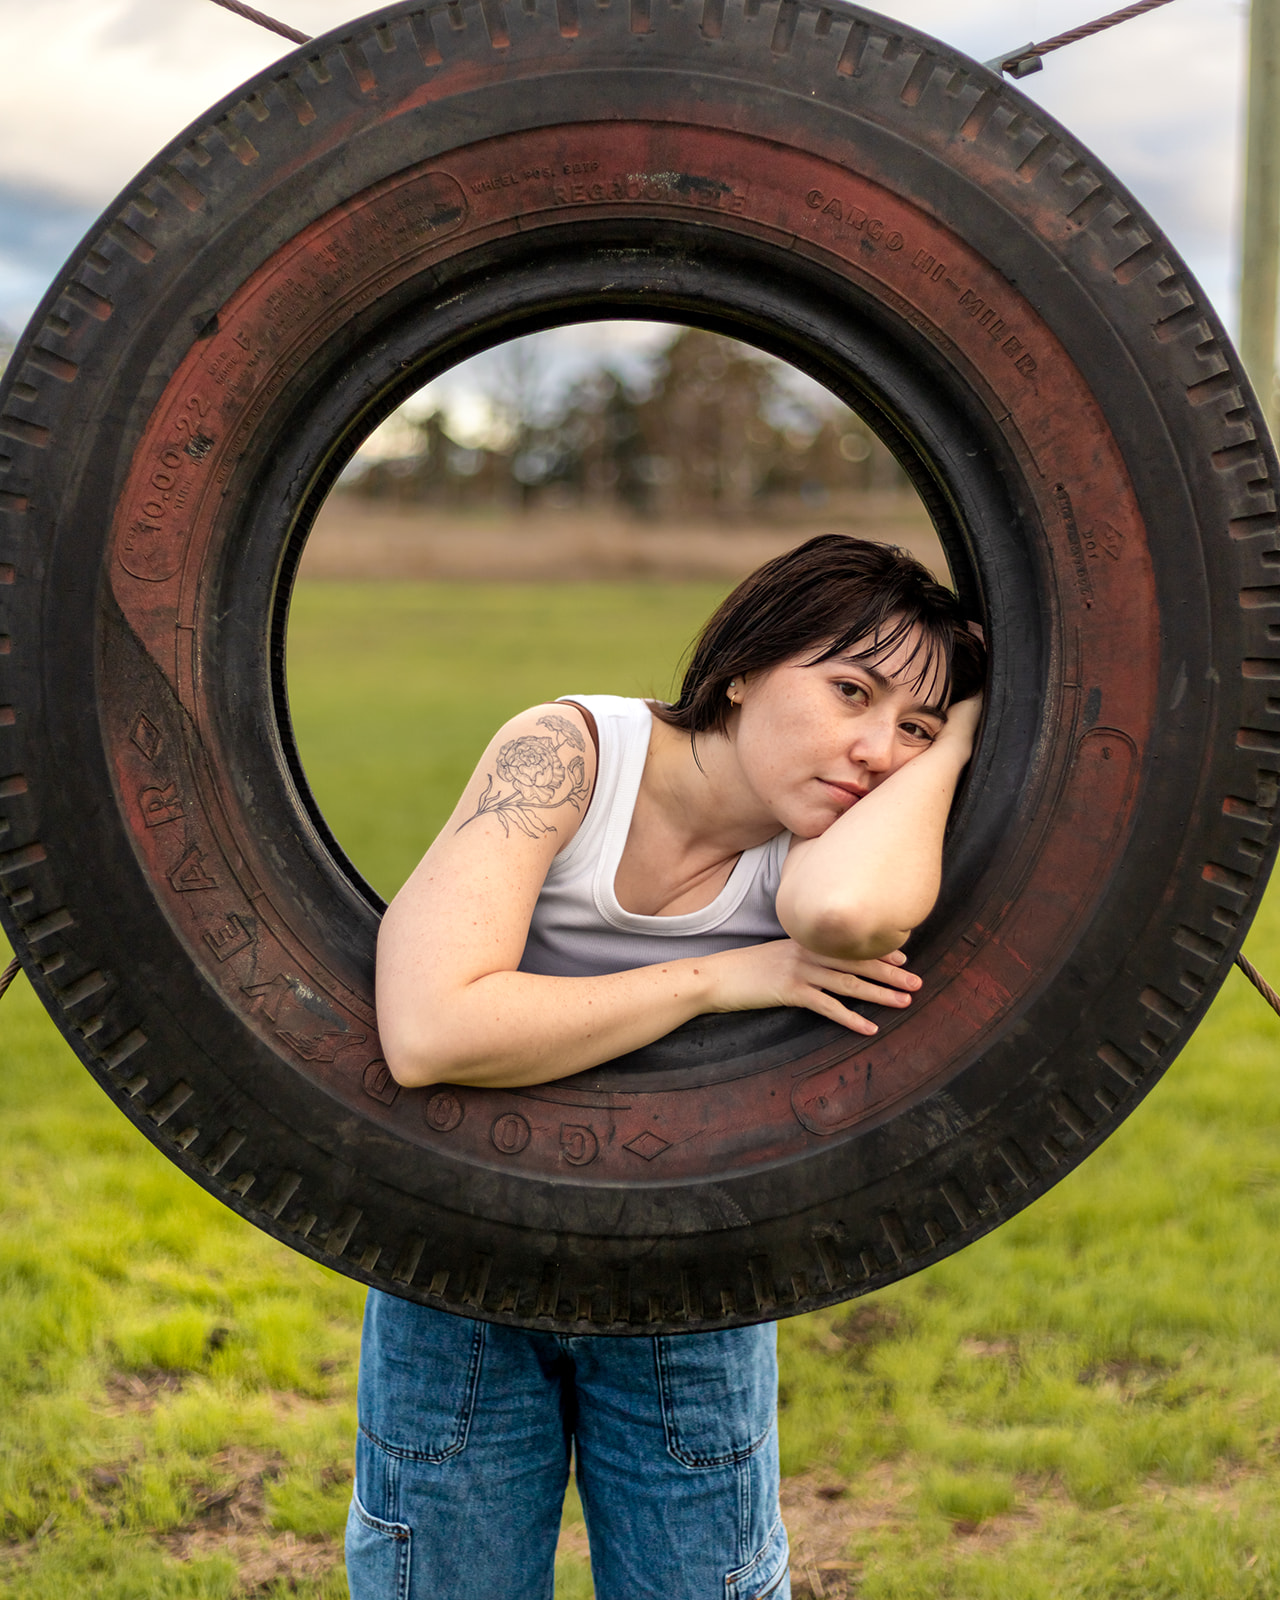 trans person leans on tire